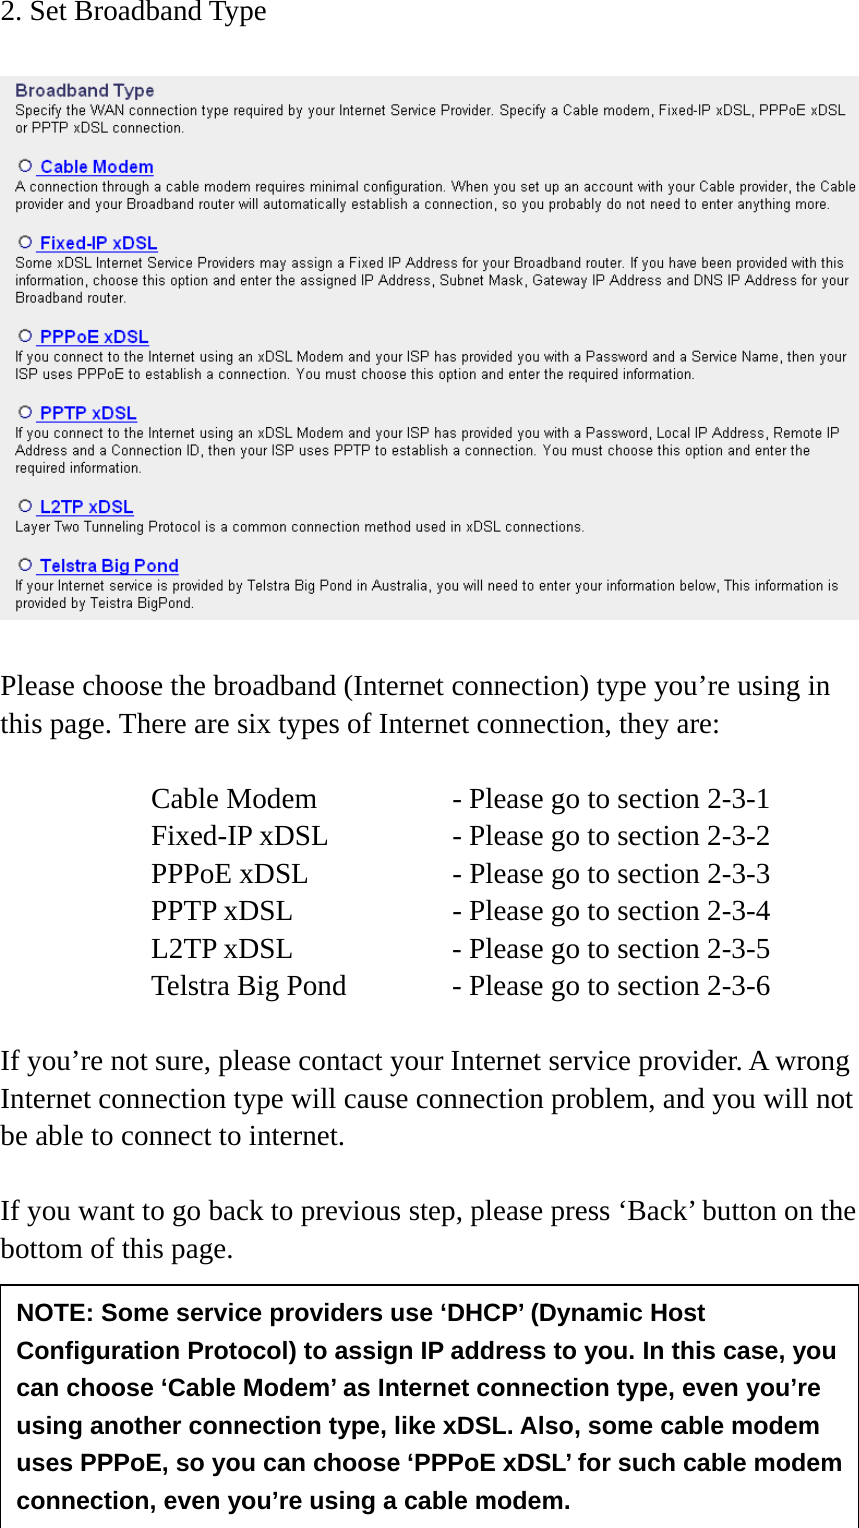 35  2. Set Broadband Type    Please choose the broadband (Internet connection) type you’re using in this page. There are six types of Internet connection, they are:  Cable Modem      - Please go to section 2-3-1 Fixed-IP xDSL      - Please go to section 2-3-2 PPPoE xDSL      - Please go to section 2-3-3 PPTP xDSL       - Please go to section 2-3-4 L2TP xDSL       - Please go to section 2-3-5 Telstra Big Pond     - Please go to section 2-3-6  If you’re not sure, please contact your Internet service provider. A wrong Internet connection type will cause connection problem, and you will not be able to connect to internet.  If you want to go back to previous step, please press ‘Back’ button on the bottom of this page.    NOTE: Some service providers use ‘DHCP’ (Dynamic Host Configuration Protocol) to assign IP address to you. In this case, you can choose ‘Cable Modem’ as Internet connection type, even you’re using another connection type, like xDSL. Also, some cable modem uses PPPoE, so you can choose ‘PPPoE xDSL’ for such cable modem connection, even you’re using a cable modem. 